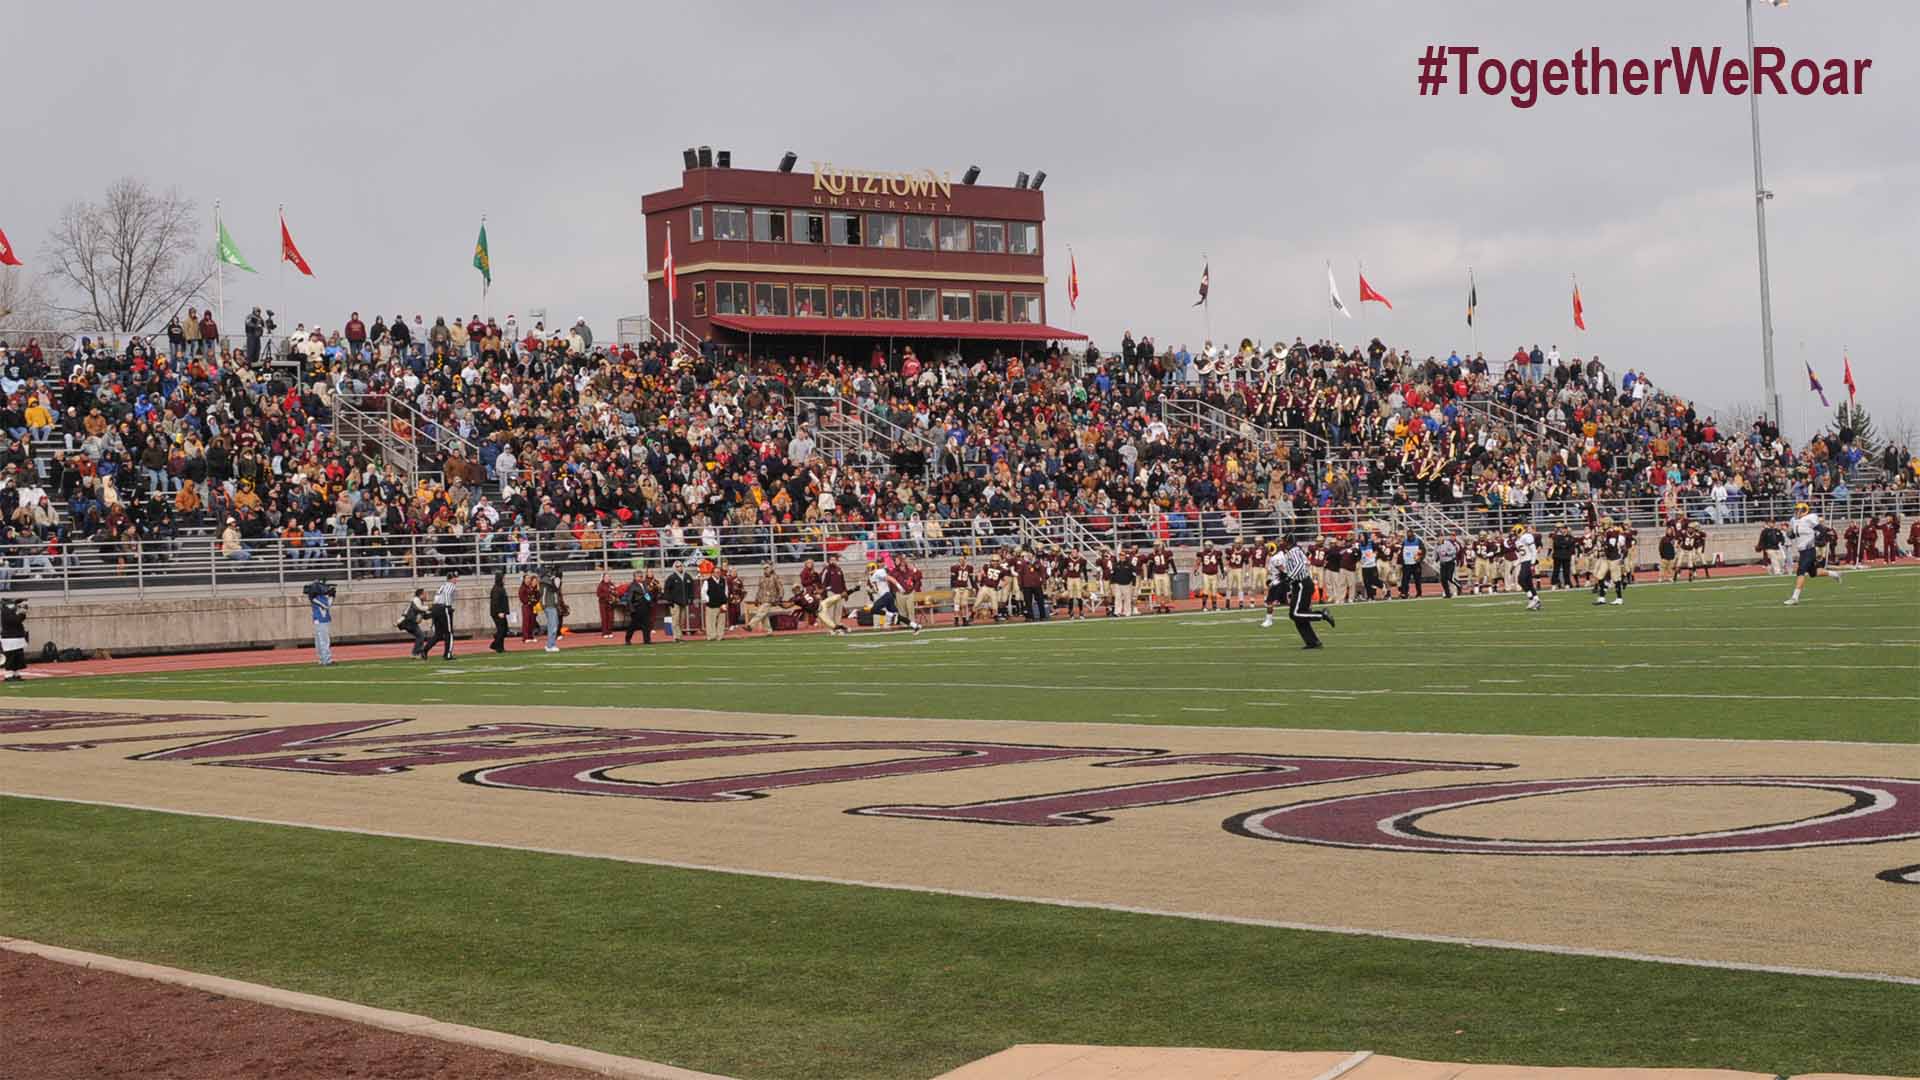 The end zone of the football field during a football game with the stands full of cheering fans in the background